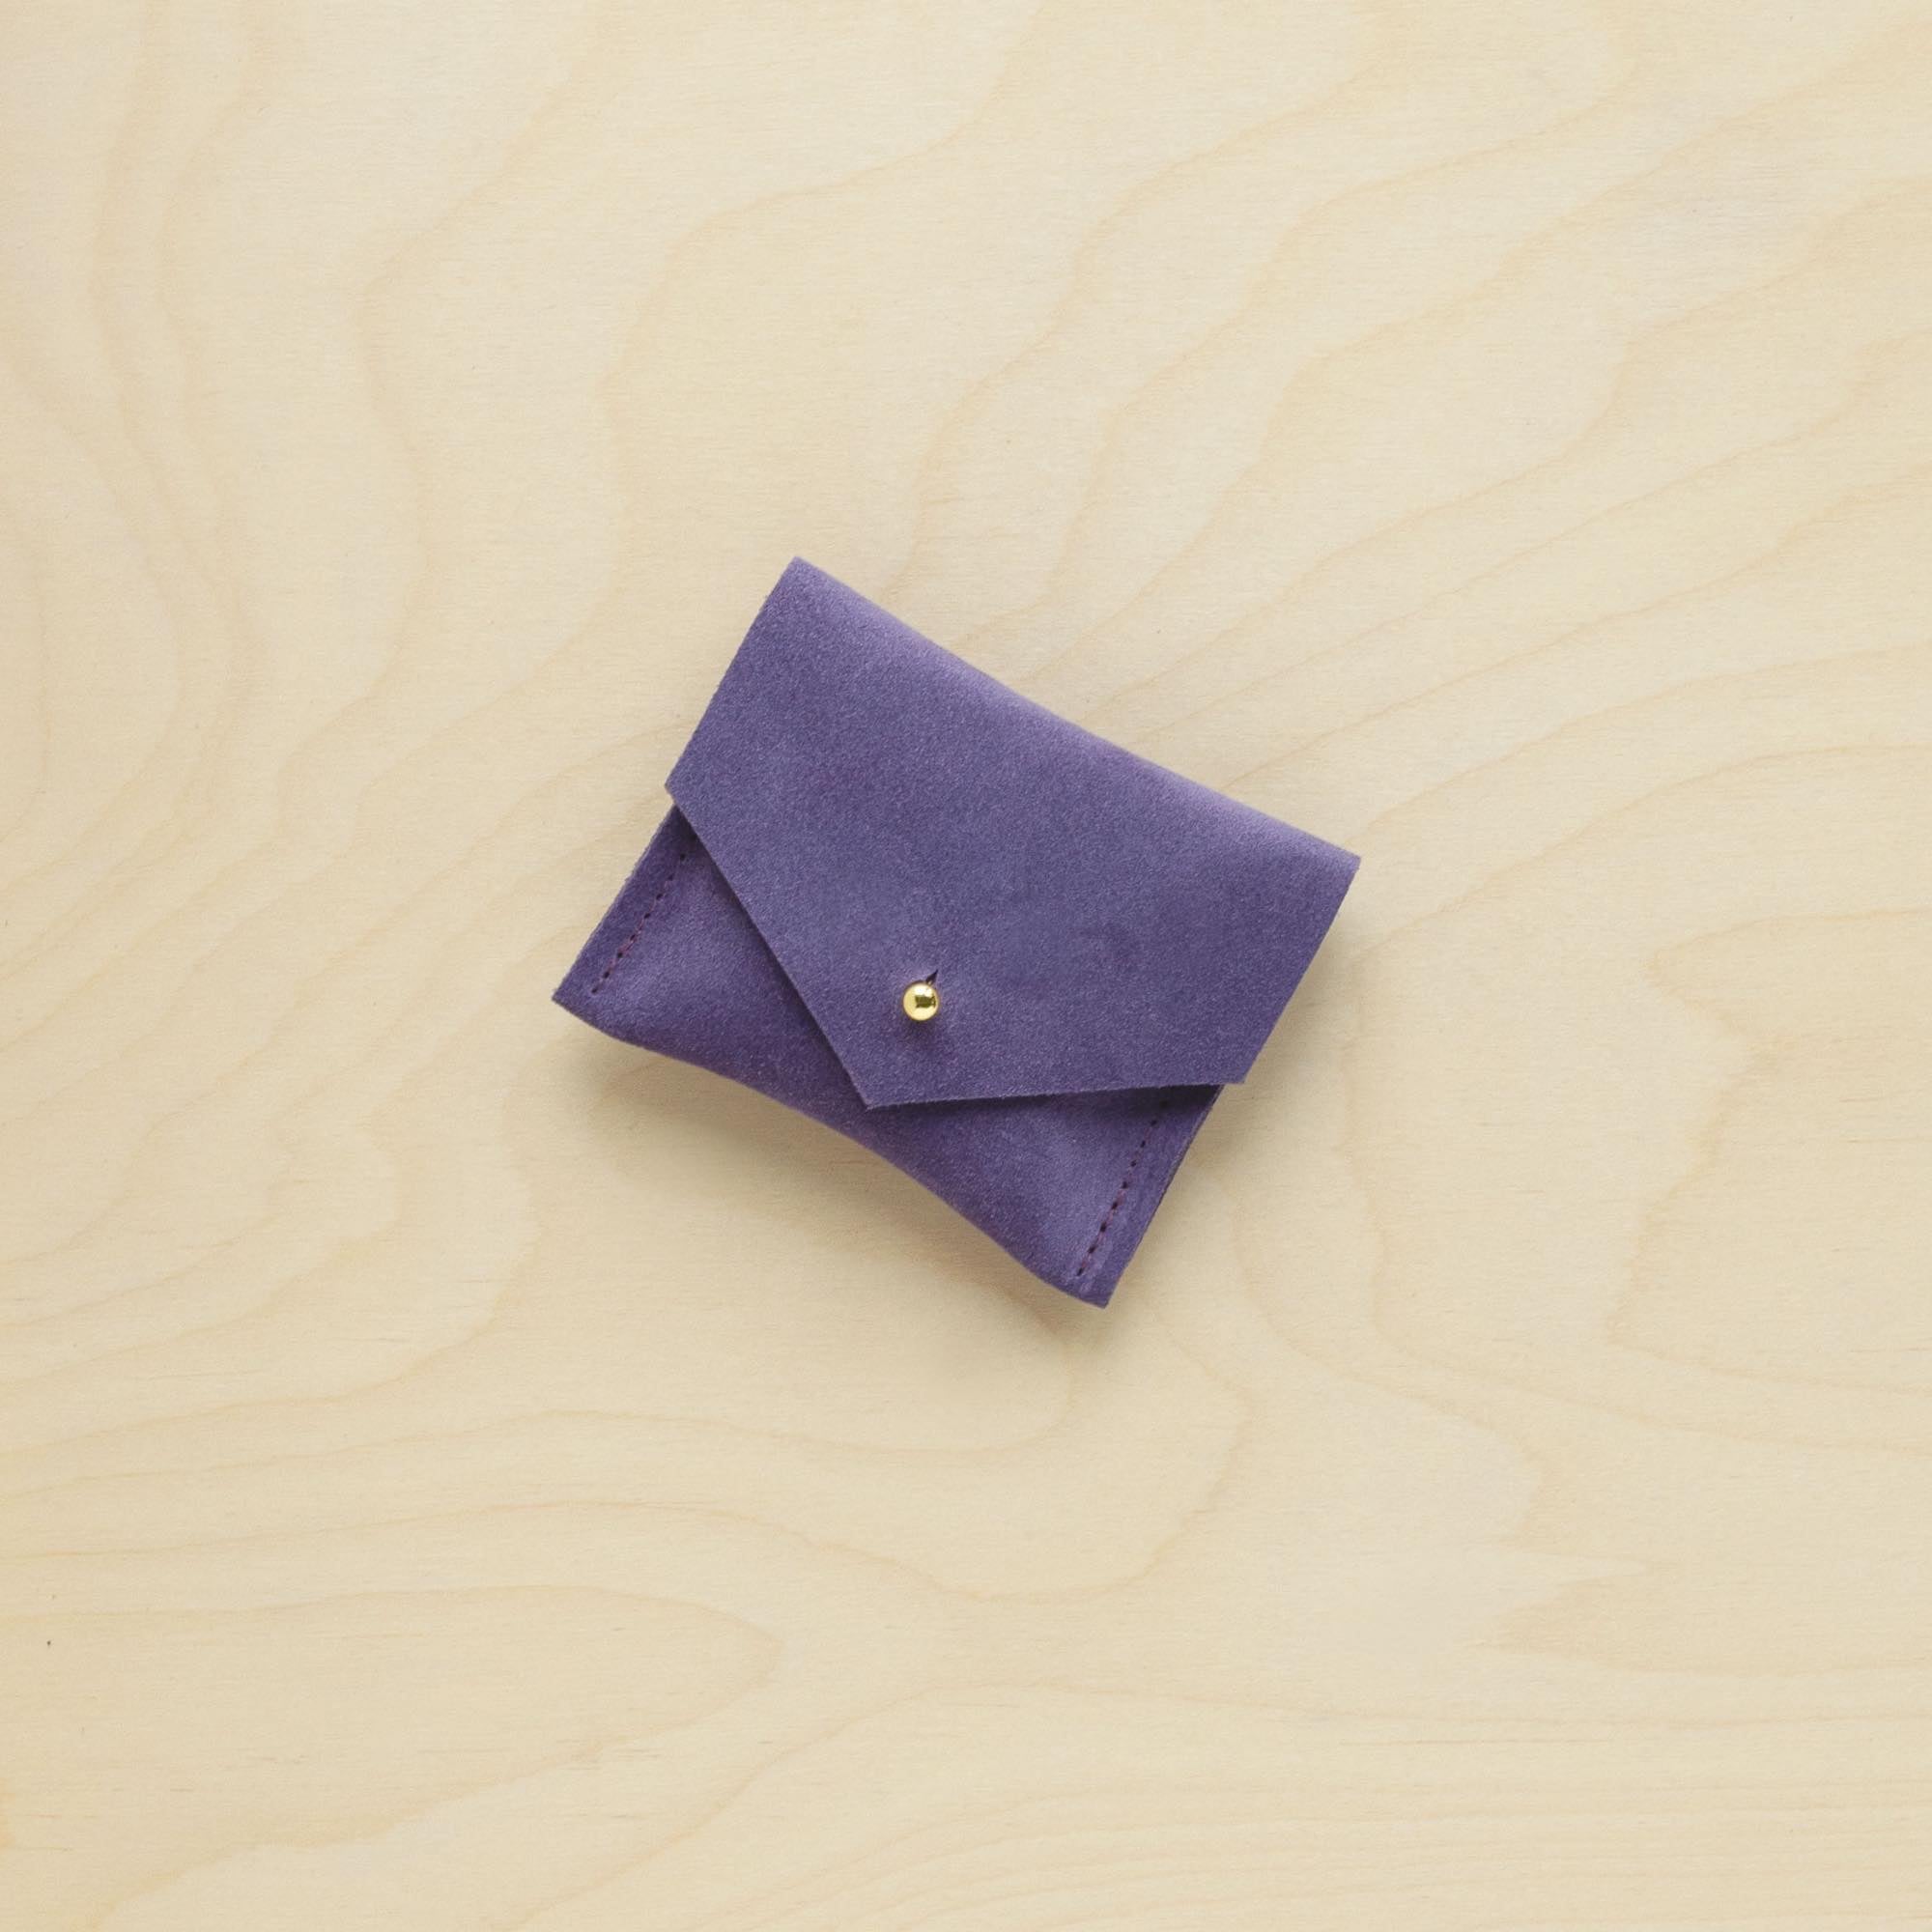 A suede Stitch Markers pouch in Grape Purple. Complete with a stud for secure closing.